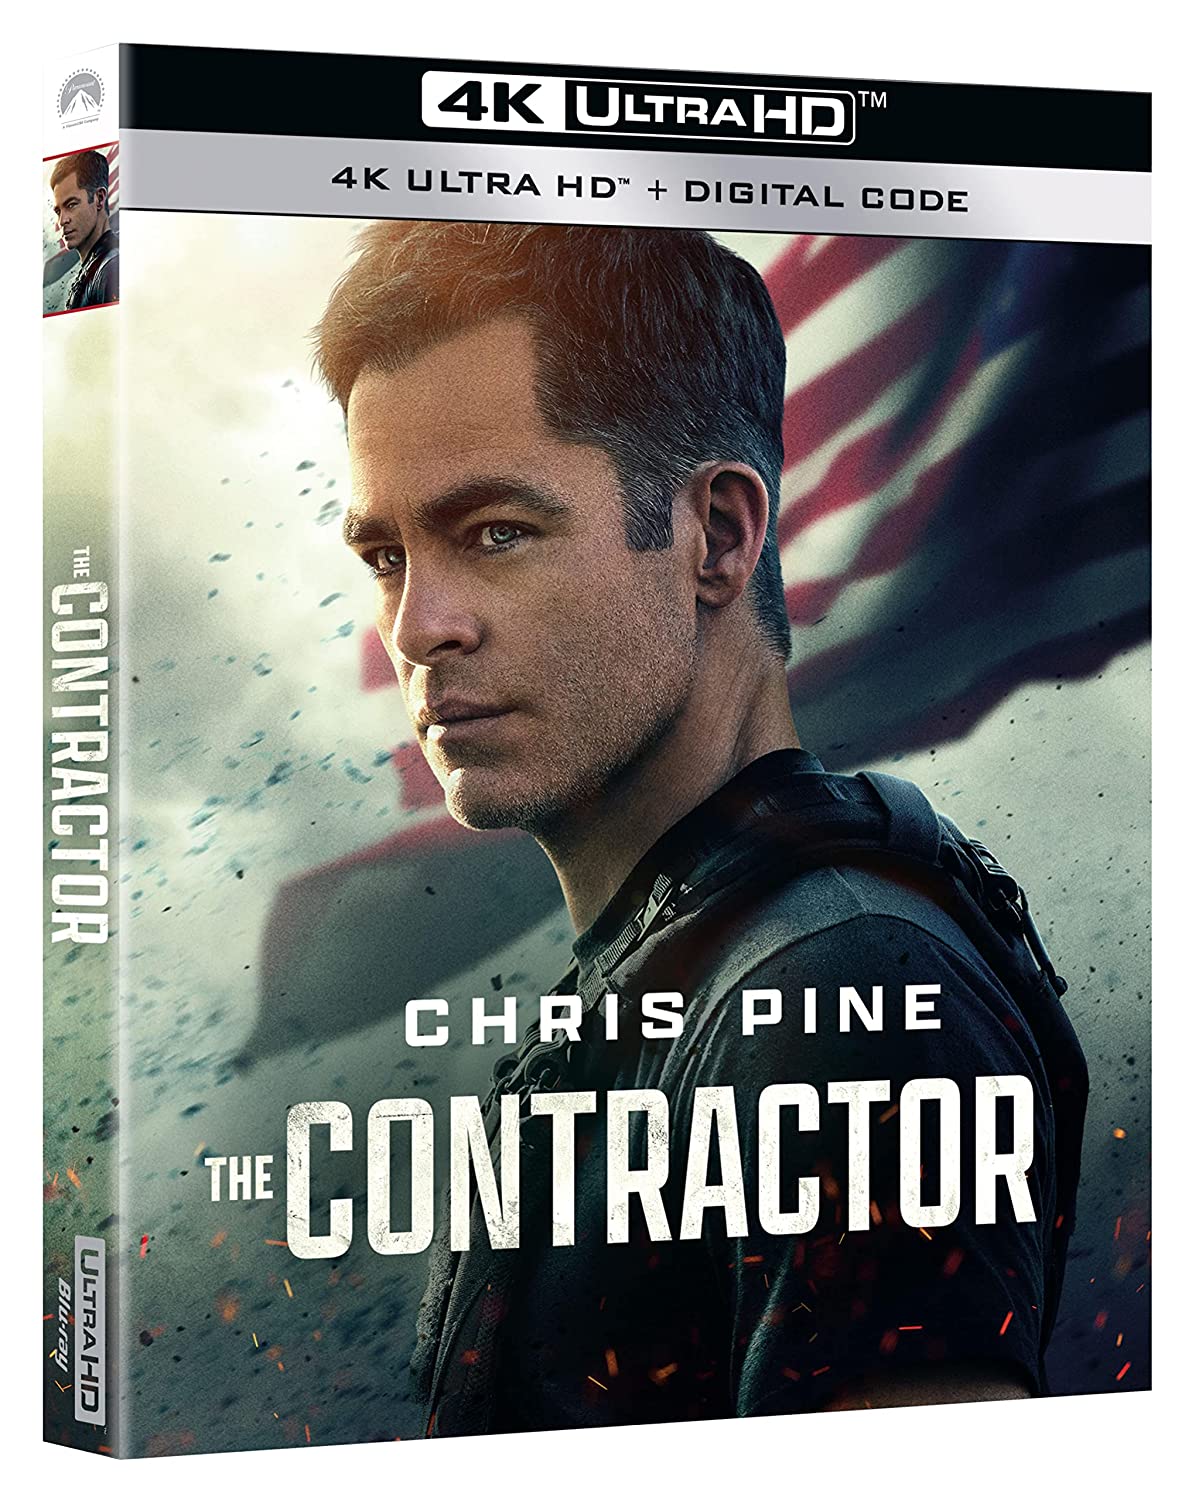 The Contractor 4k Blu-ray